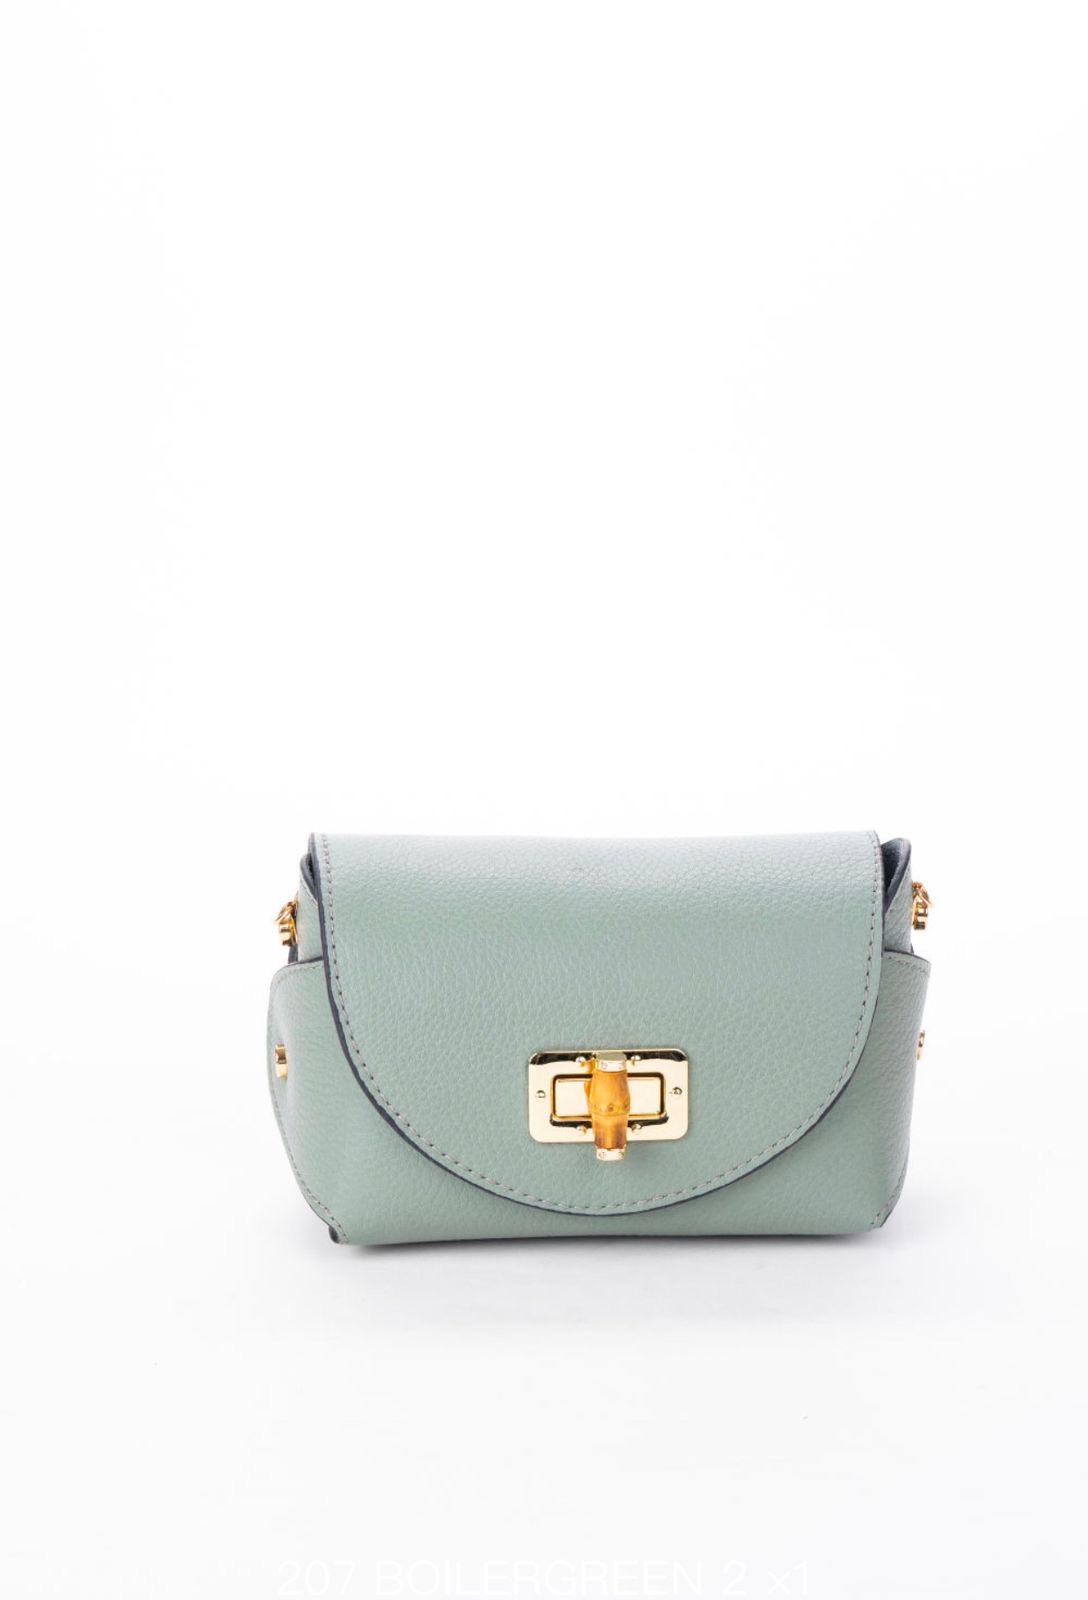 FLORENCE Green Leather Women's Shoulderbag - Darius Leather